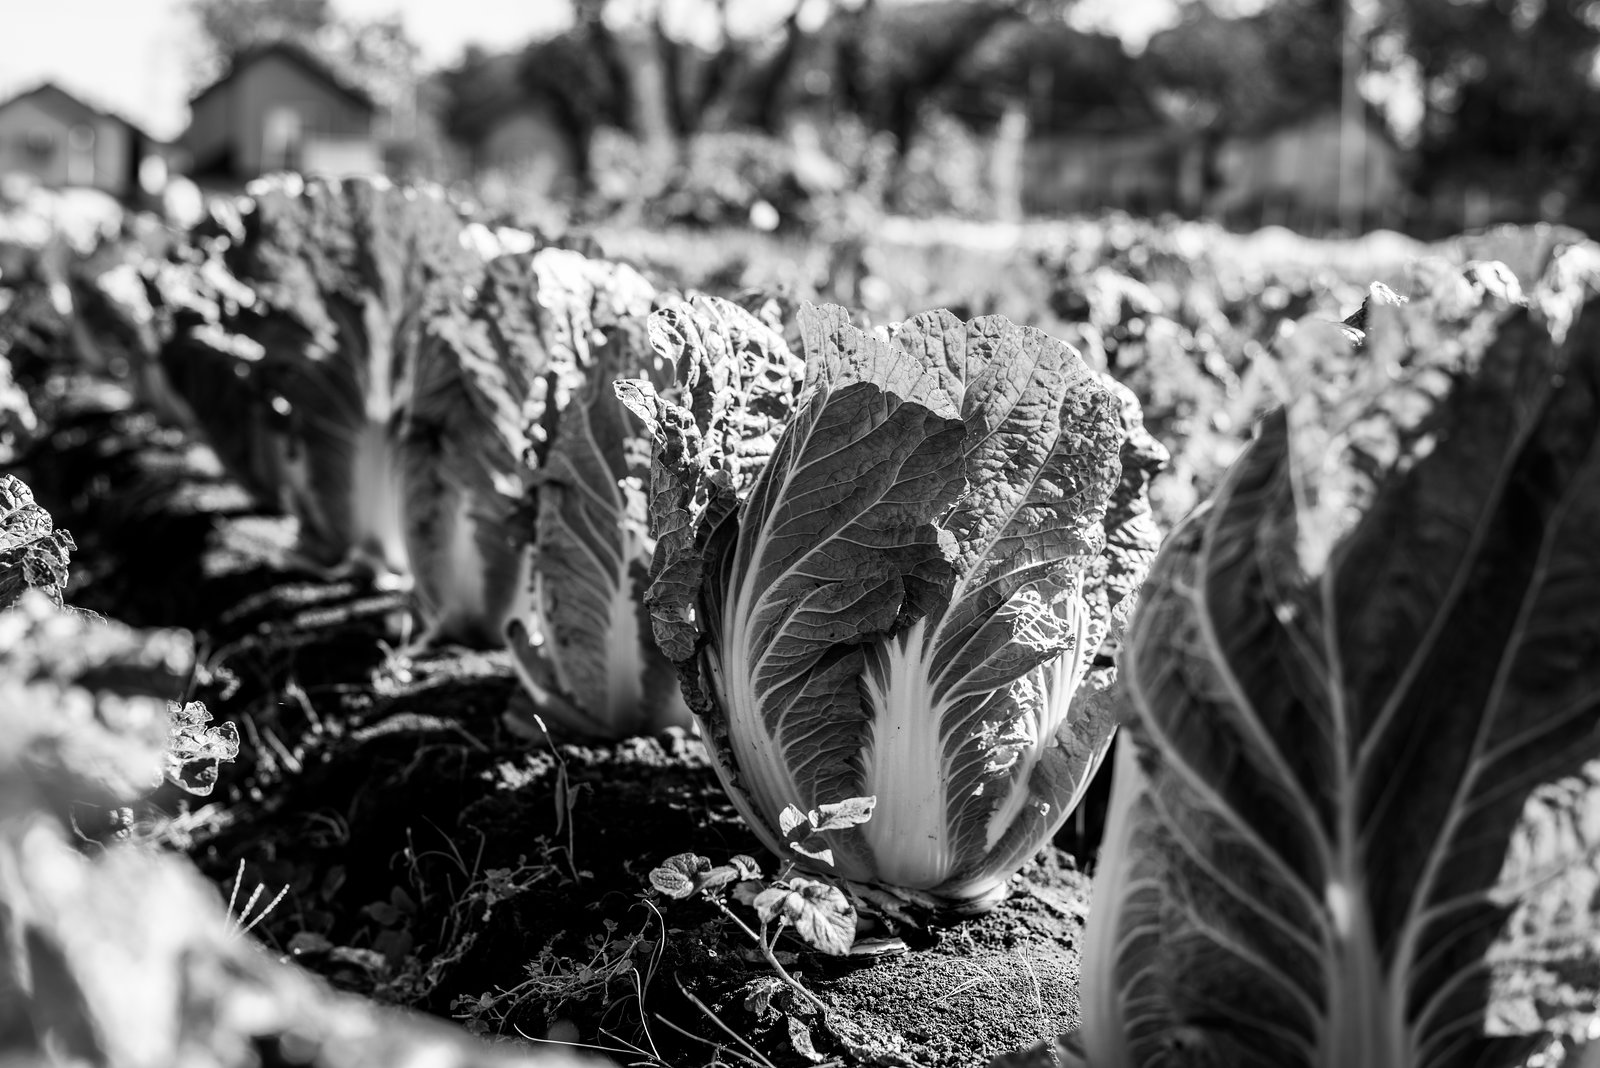 Chinese cabbage field